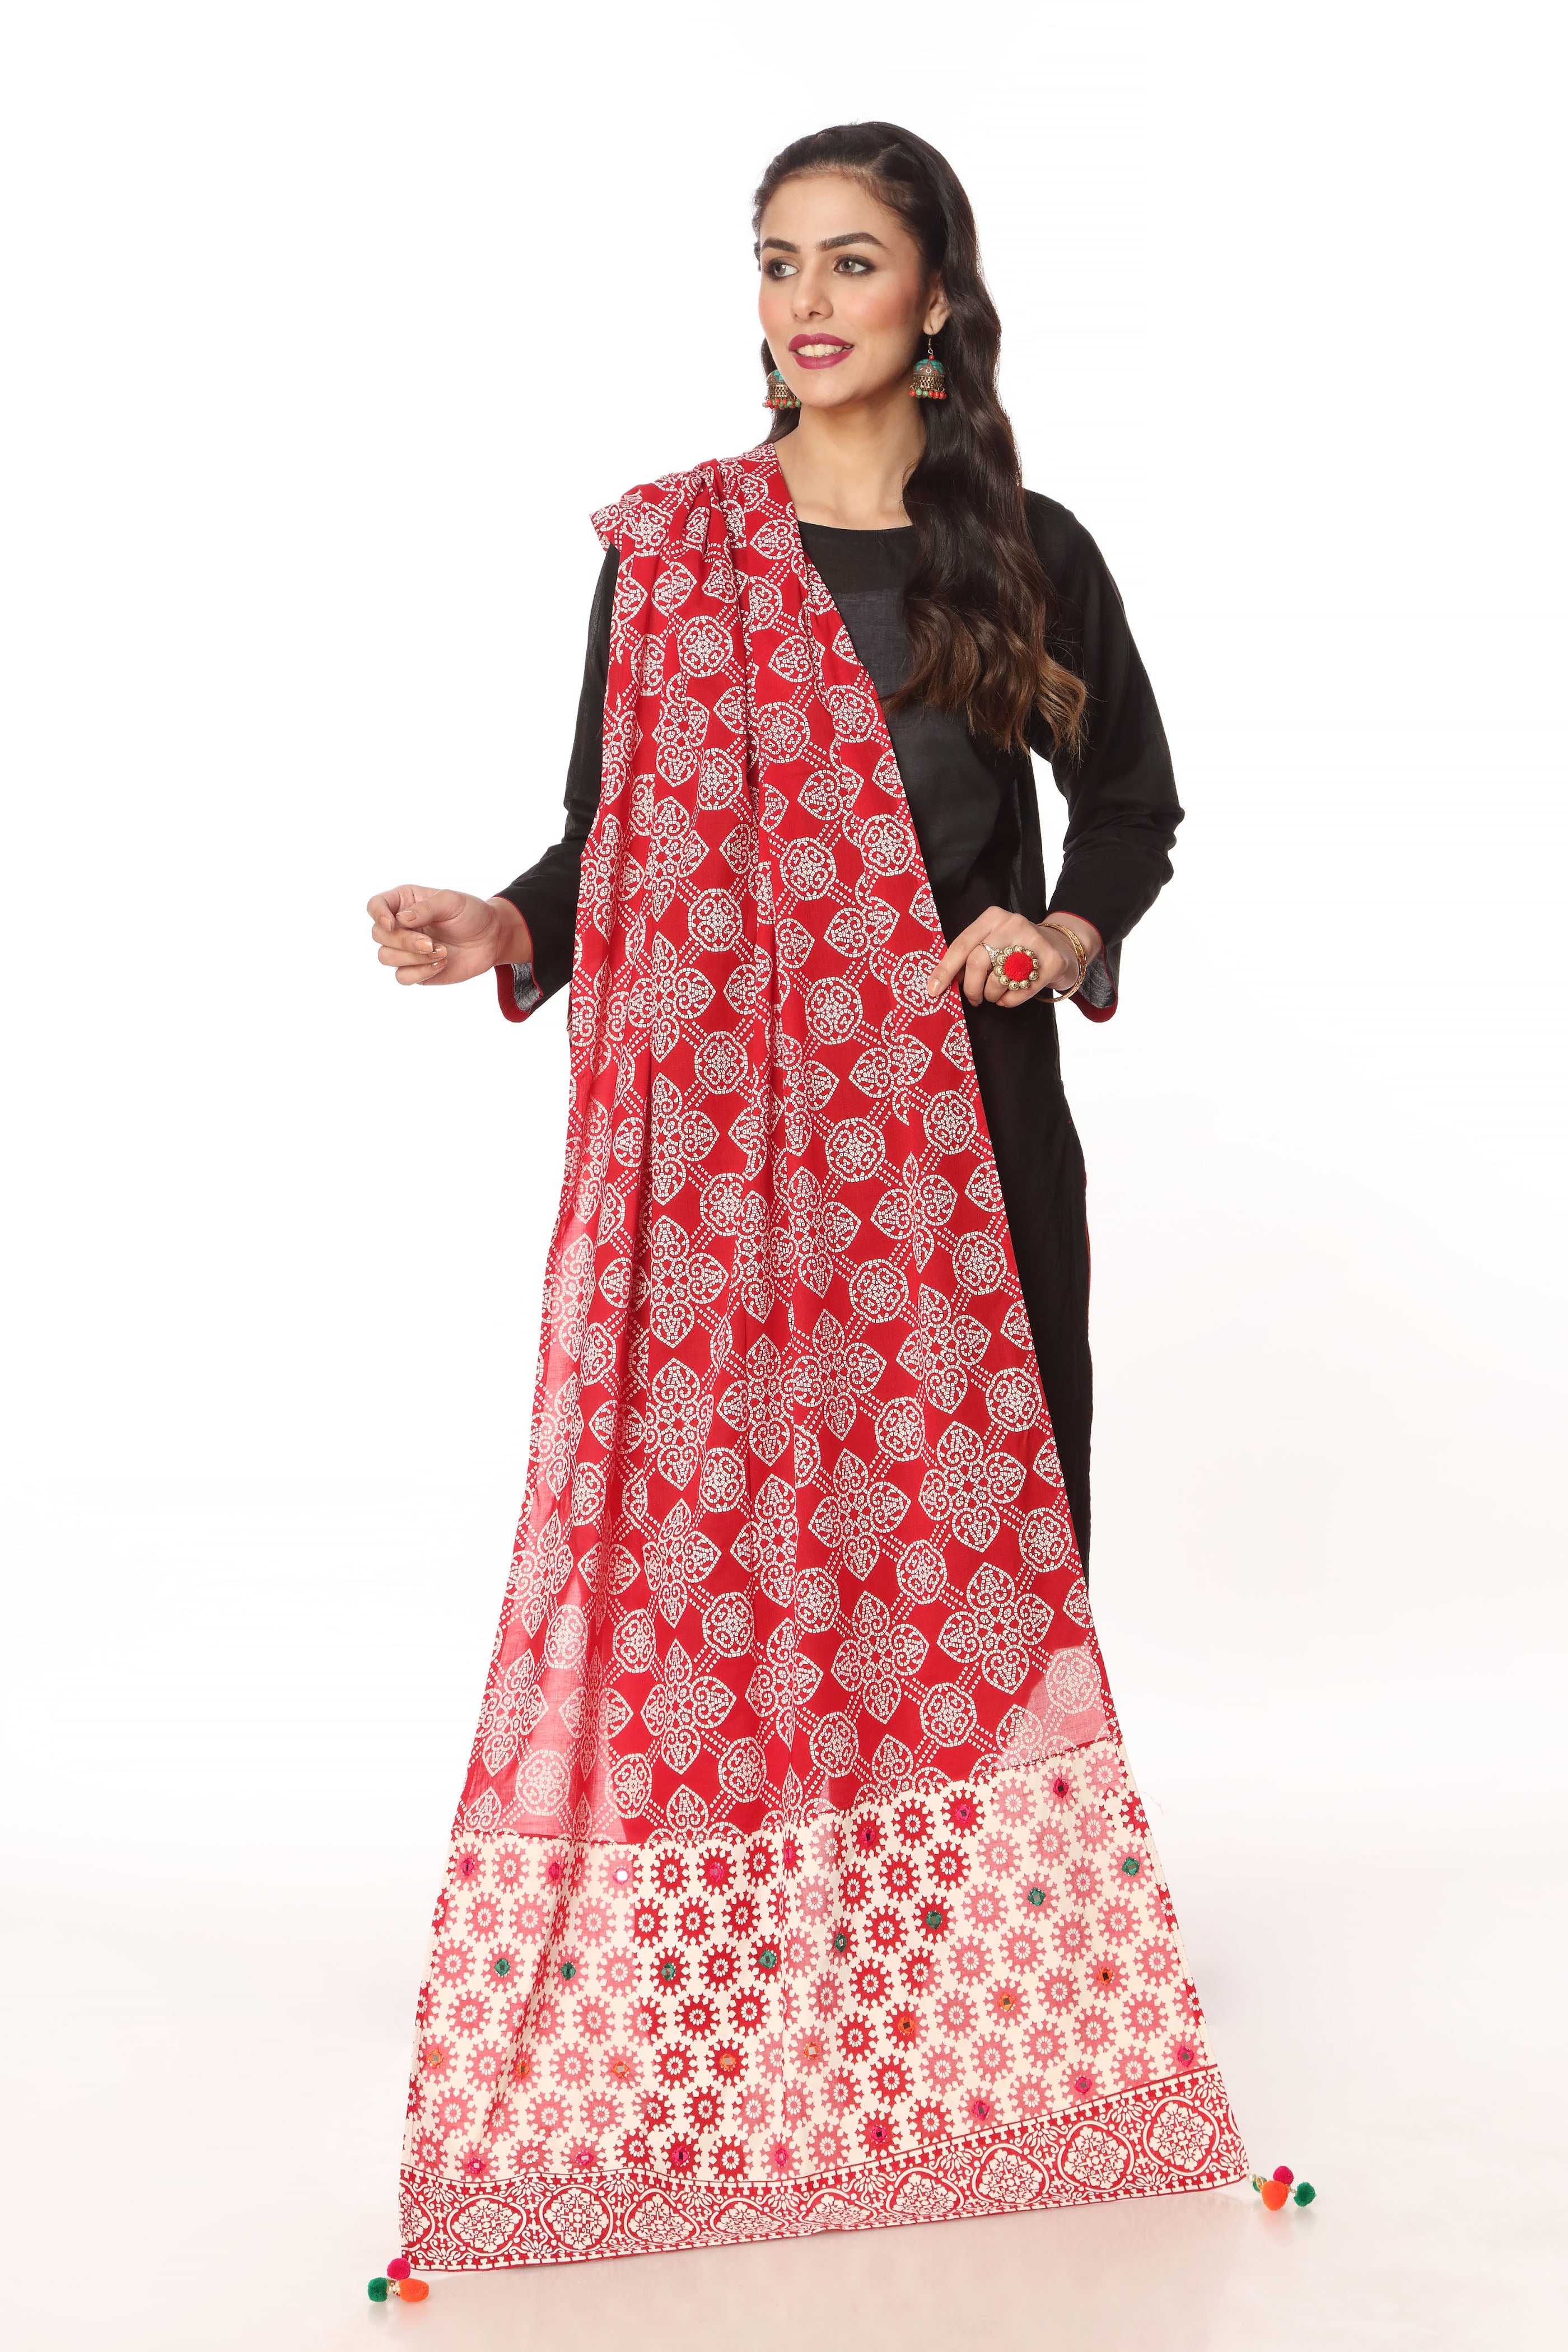 Black And White in Red coloured Printed Lawn fabric